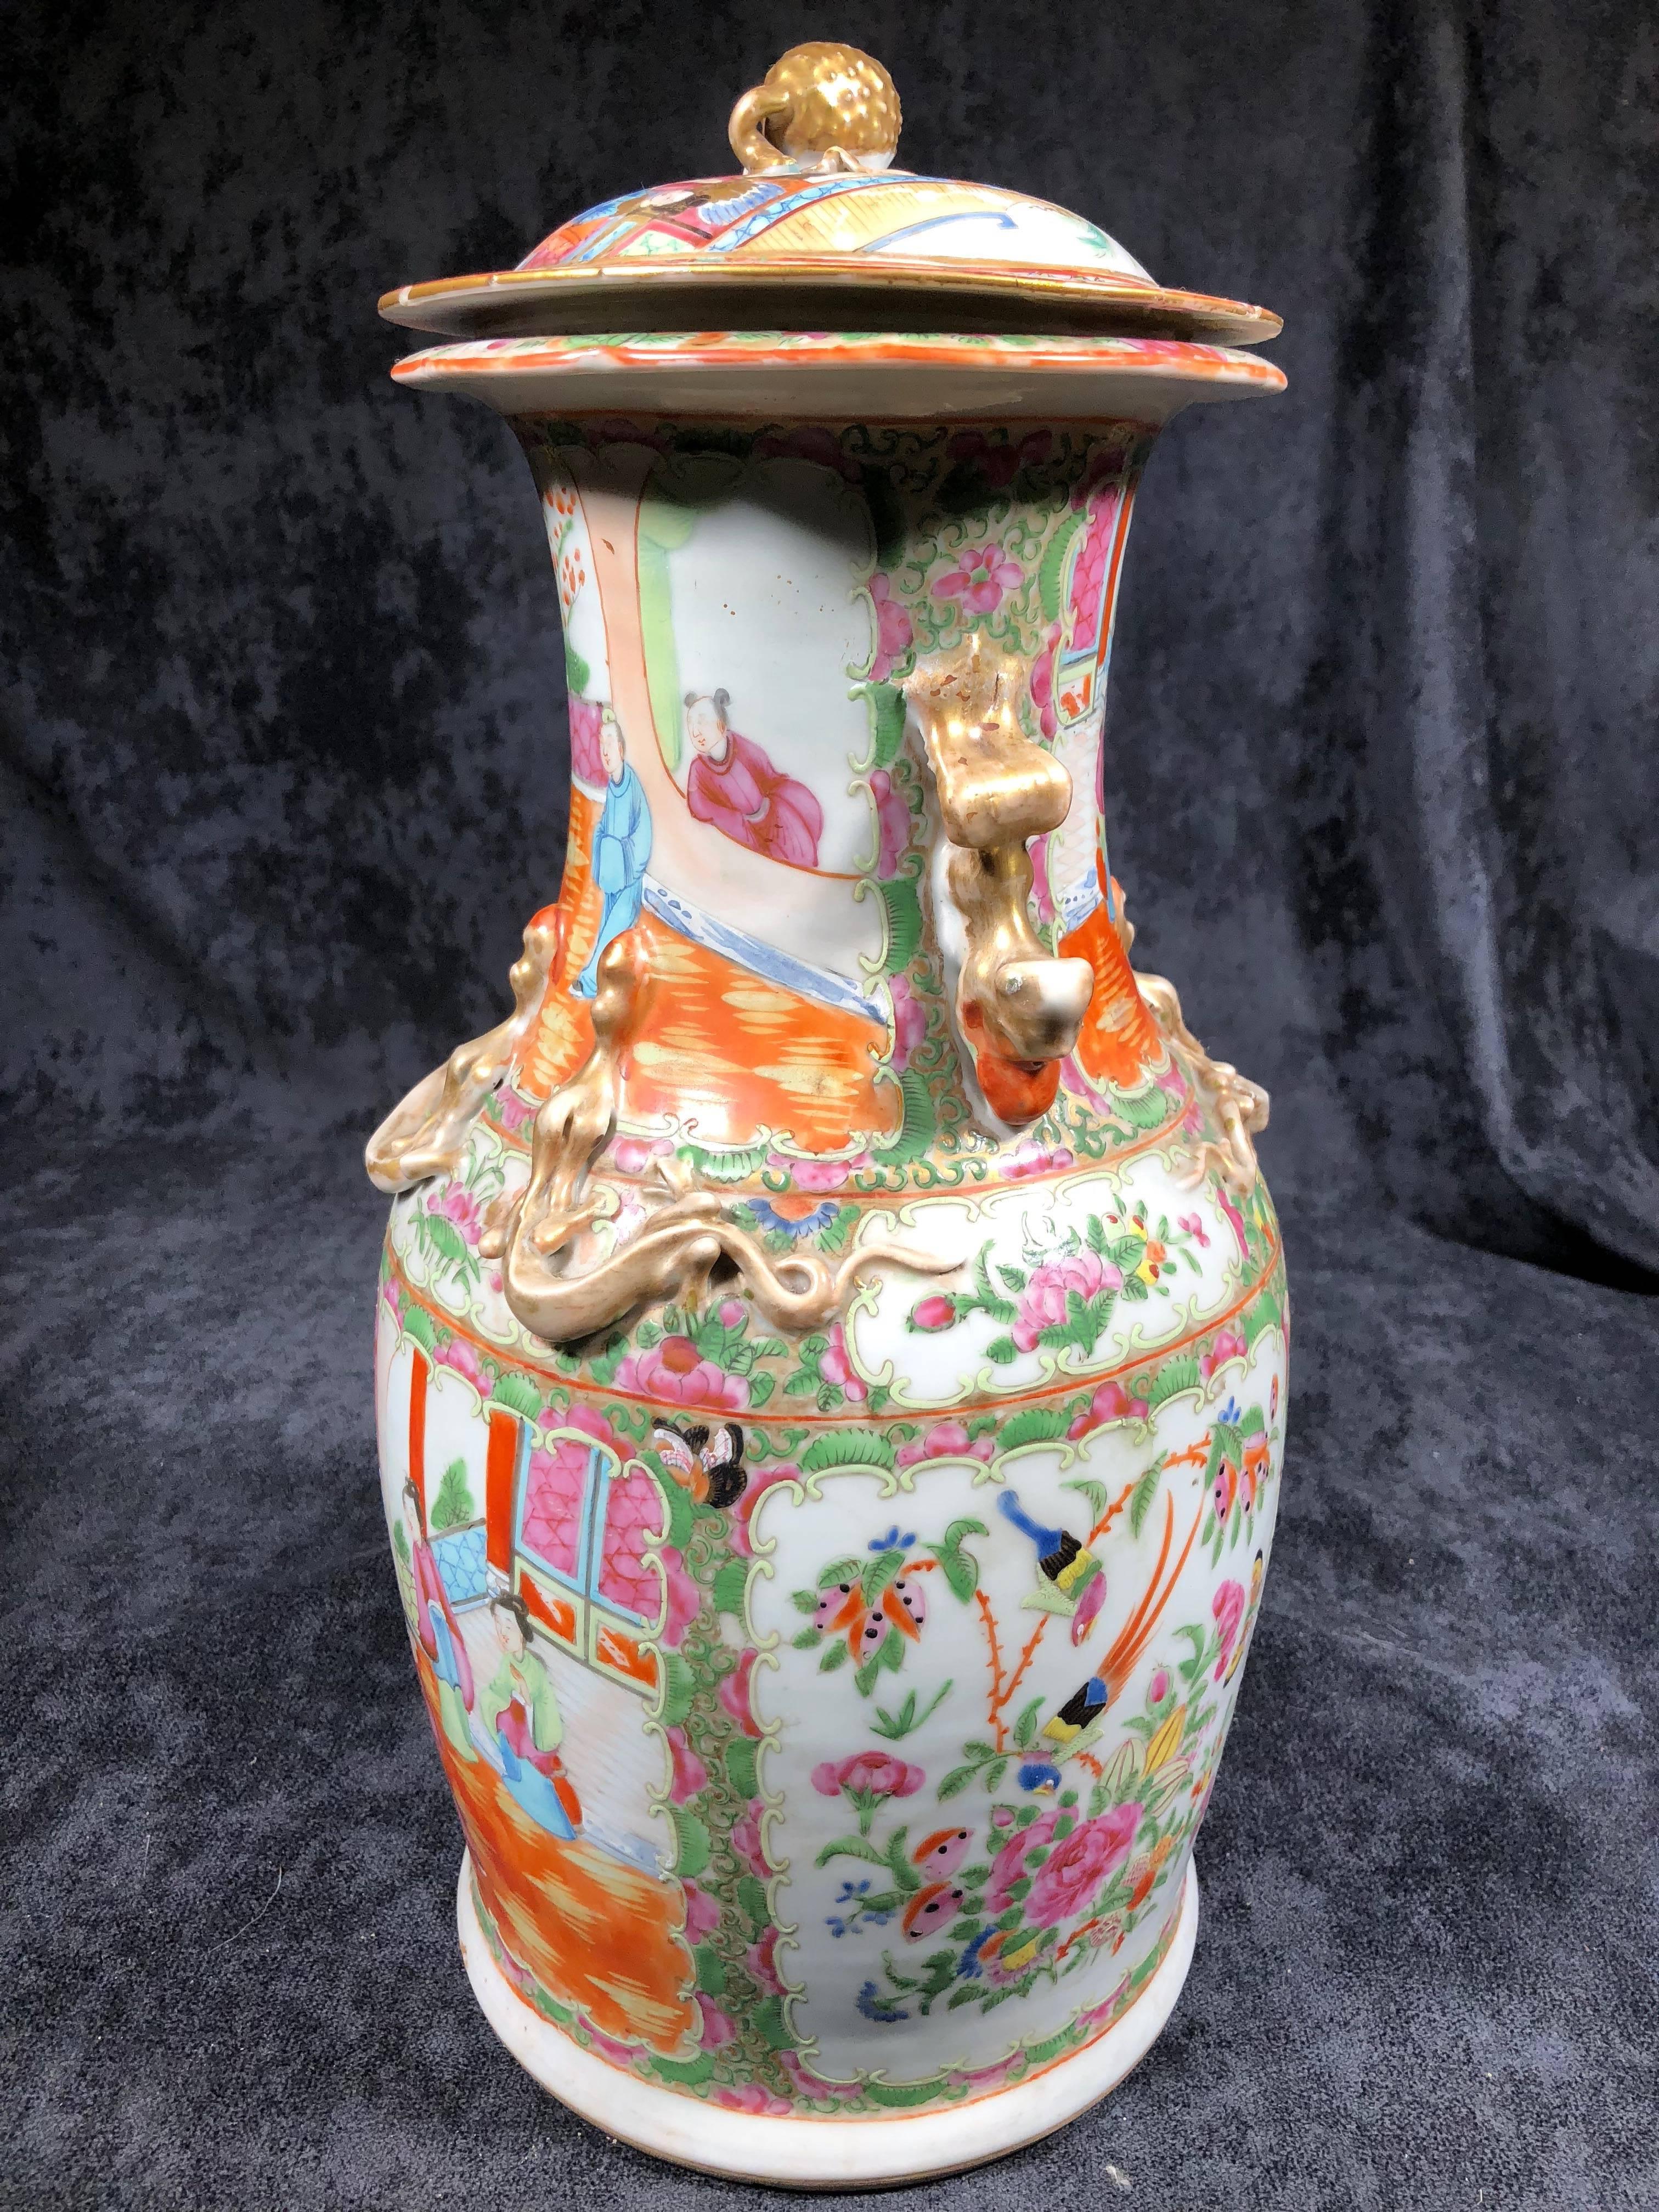 Famille rose pattern 19th century Chinese porcelain vase from Canton (Southern China) produced for export. Elegant example with lid. 19 inches tall by 9 inches wide.